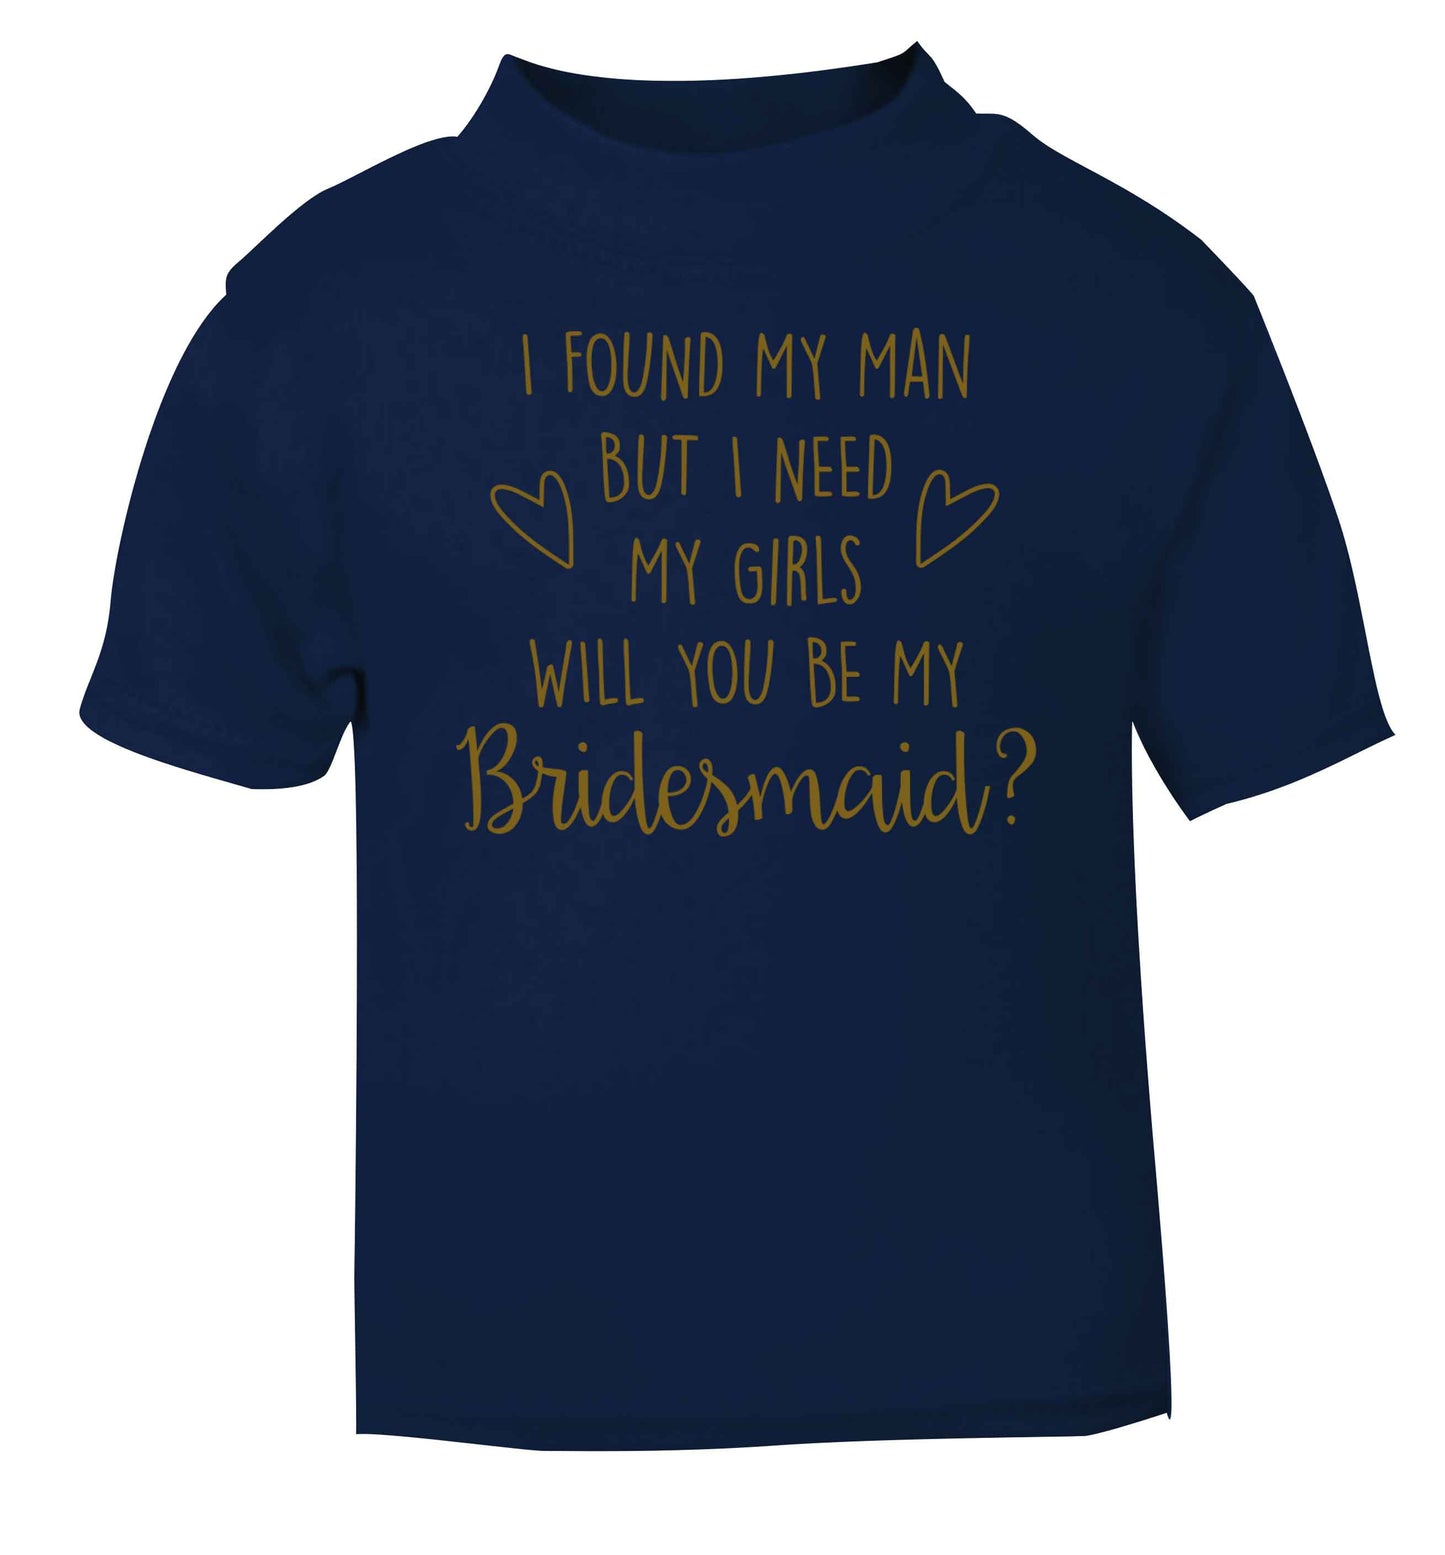 I found my man but I need my girls will you be my bridesmaid? navy baby toddler Tshirt 2 Years